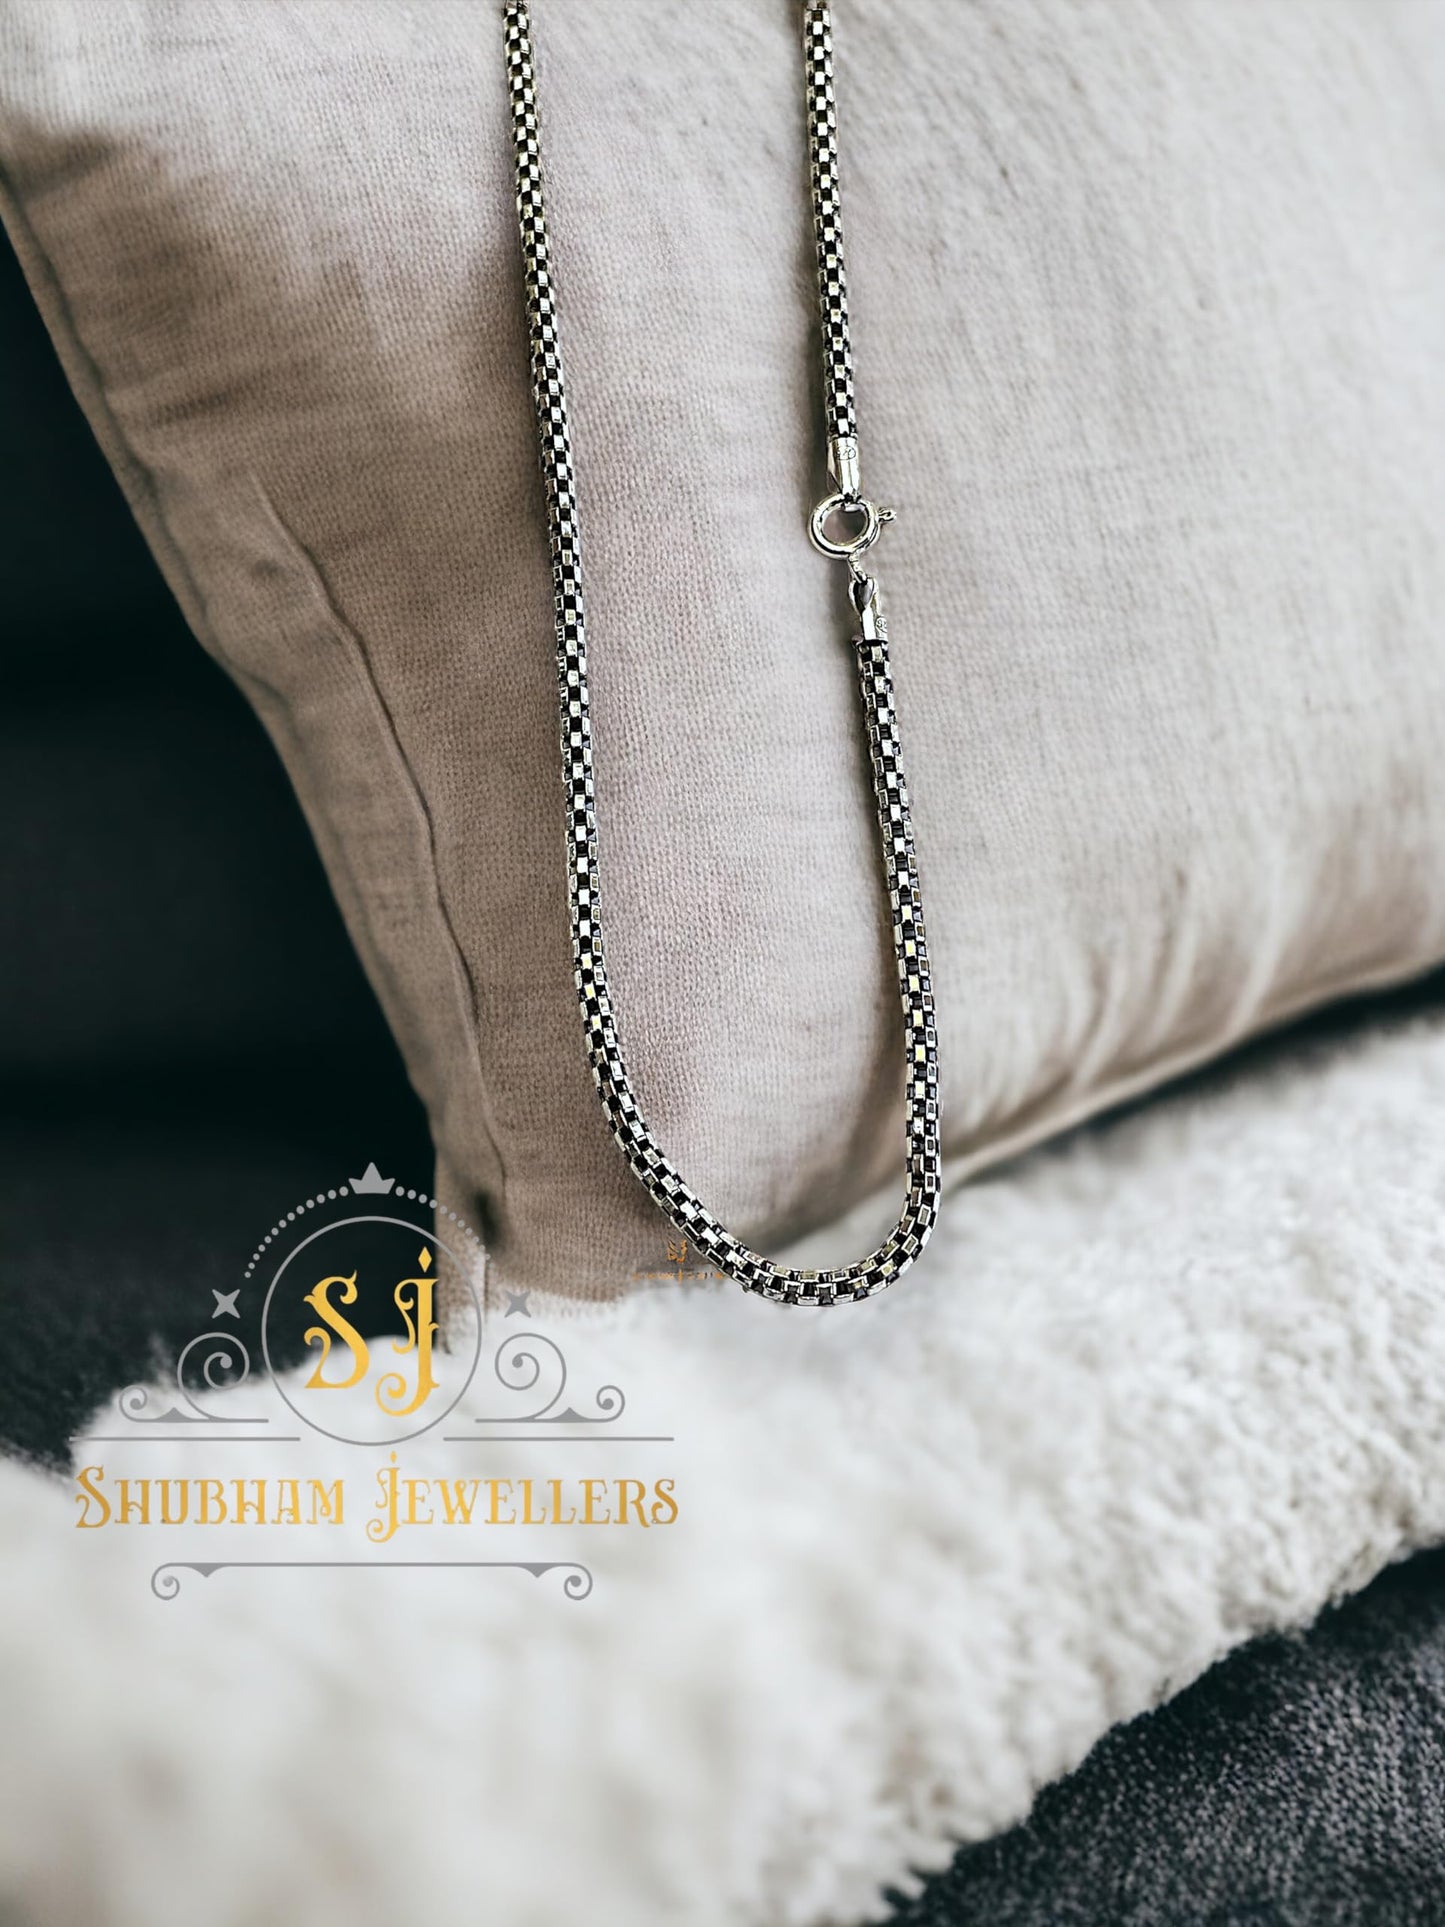 SJ SHUBHAM JEWELLERS 925 sterling silver Popcorn Chain For Men, Women, Boys, and Girls, Oxidized Chain Necklace BIS Hallmarked Chain